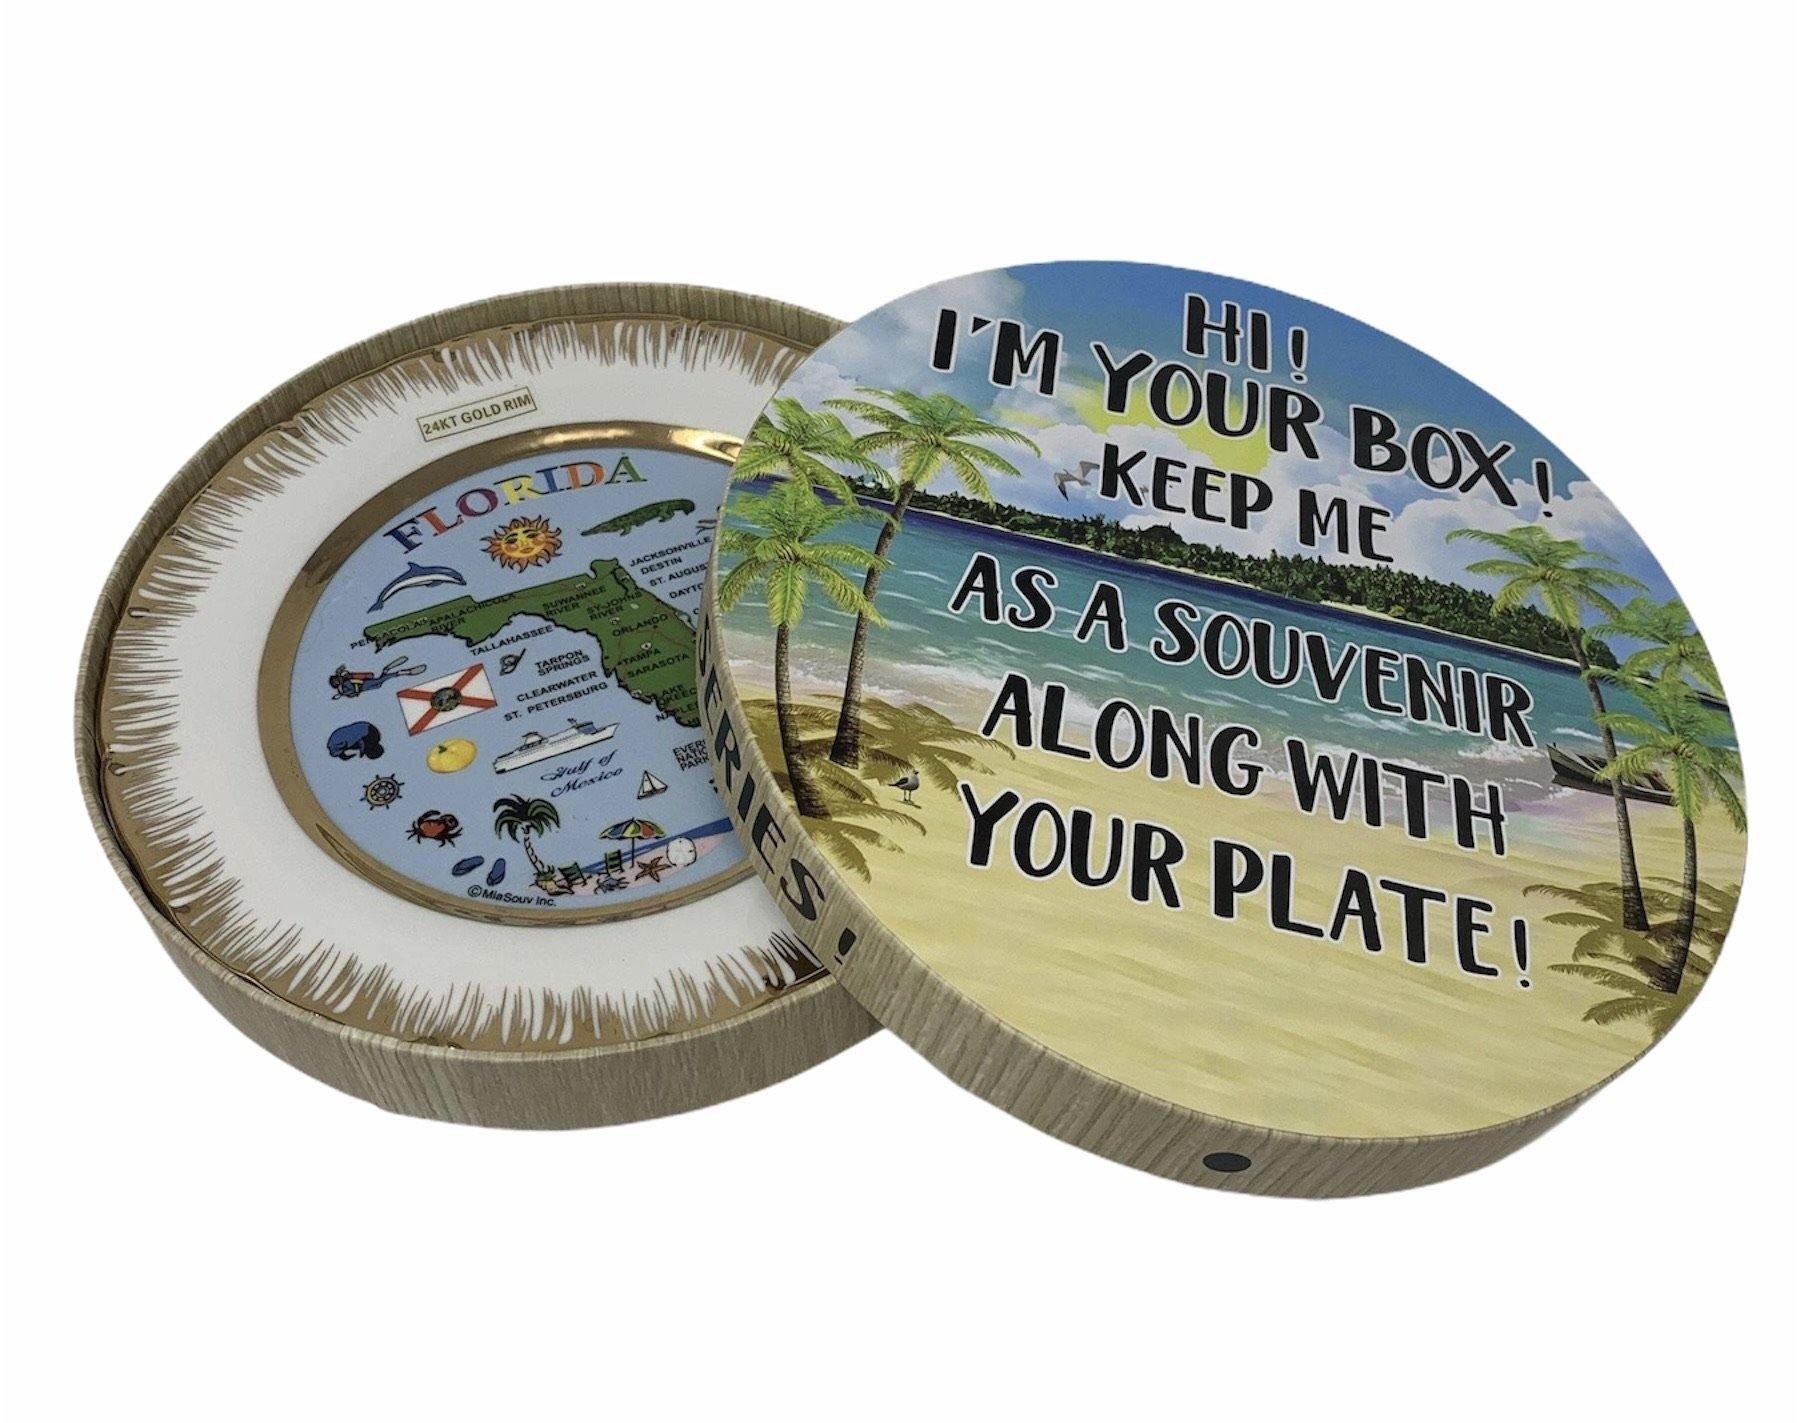 Florida Map 24KT Gold Rimmed Plate and with Display Stand